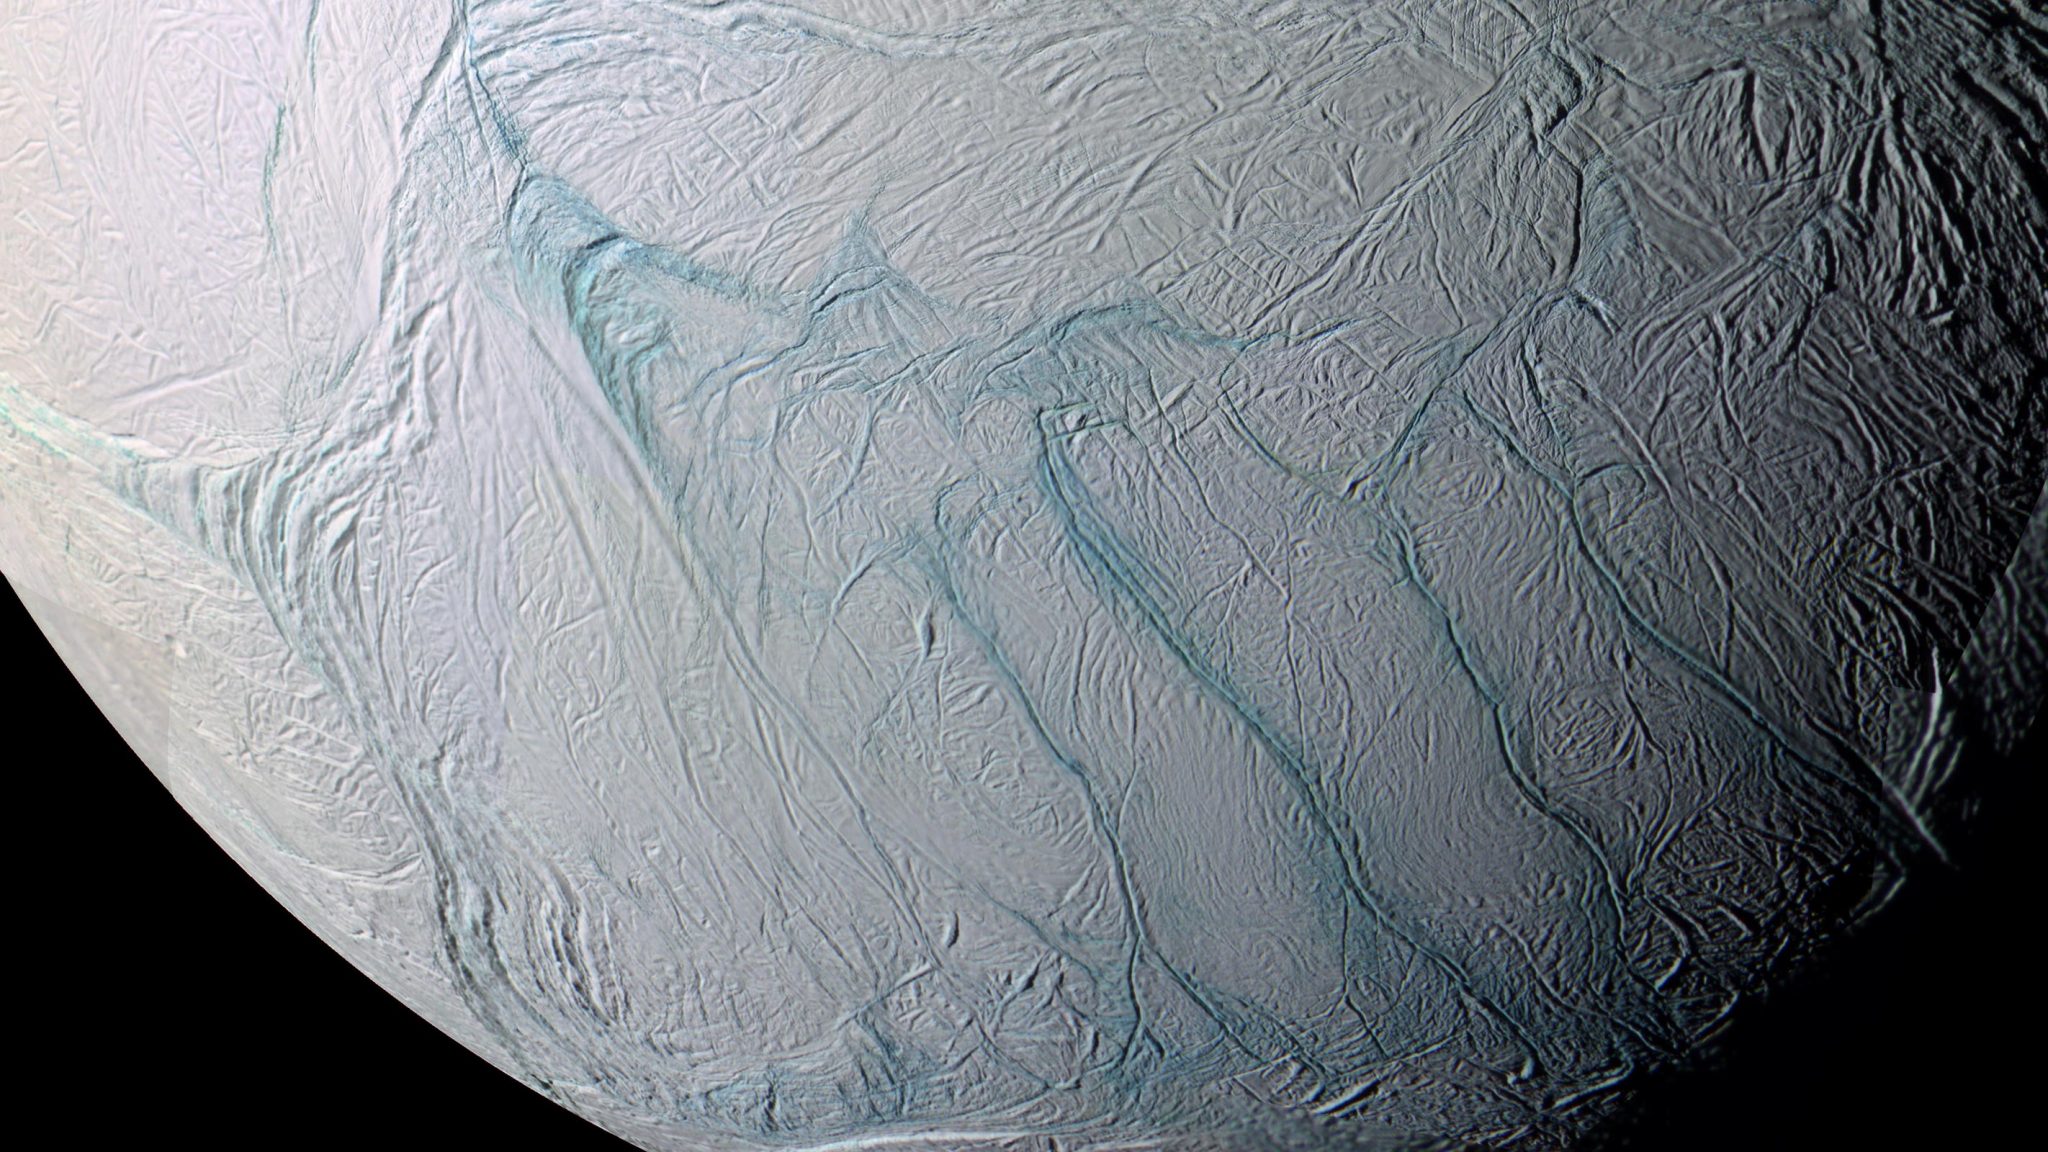 Water Erupts Through Fissures On Enceladus Icy Surface New Research Reveals The Physics